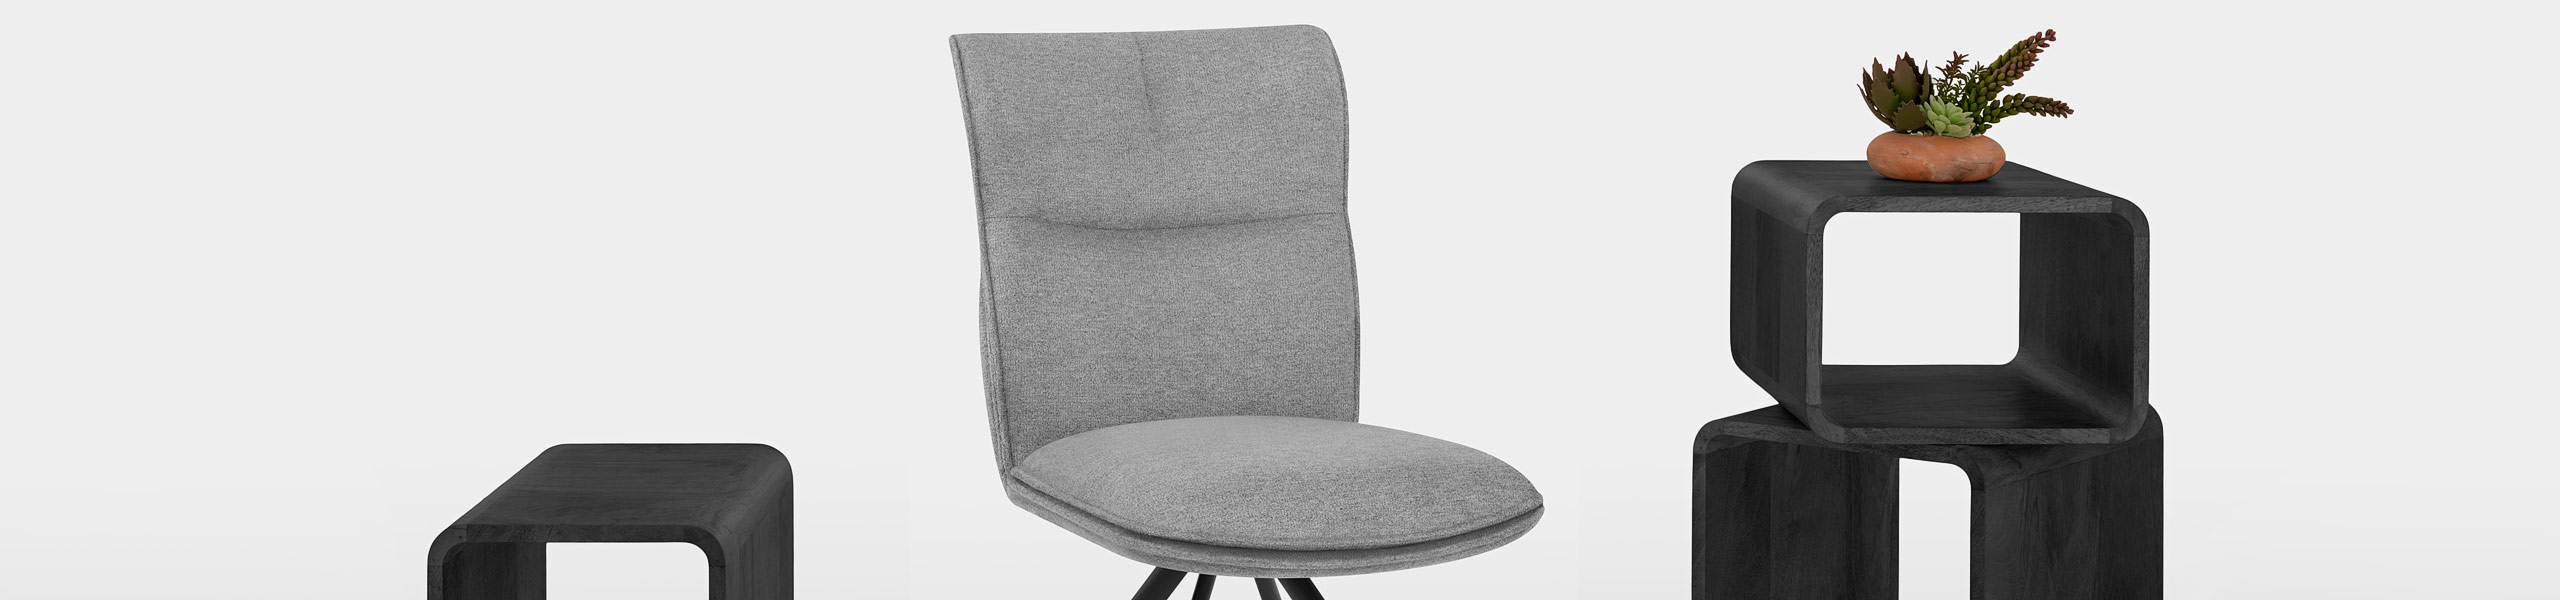 Cody Dining Chair Light Grey Fabric Video Banner